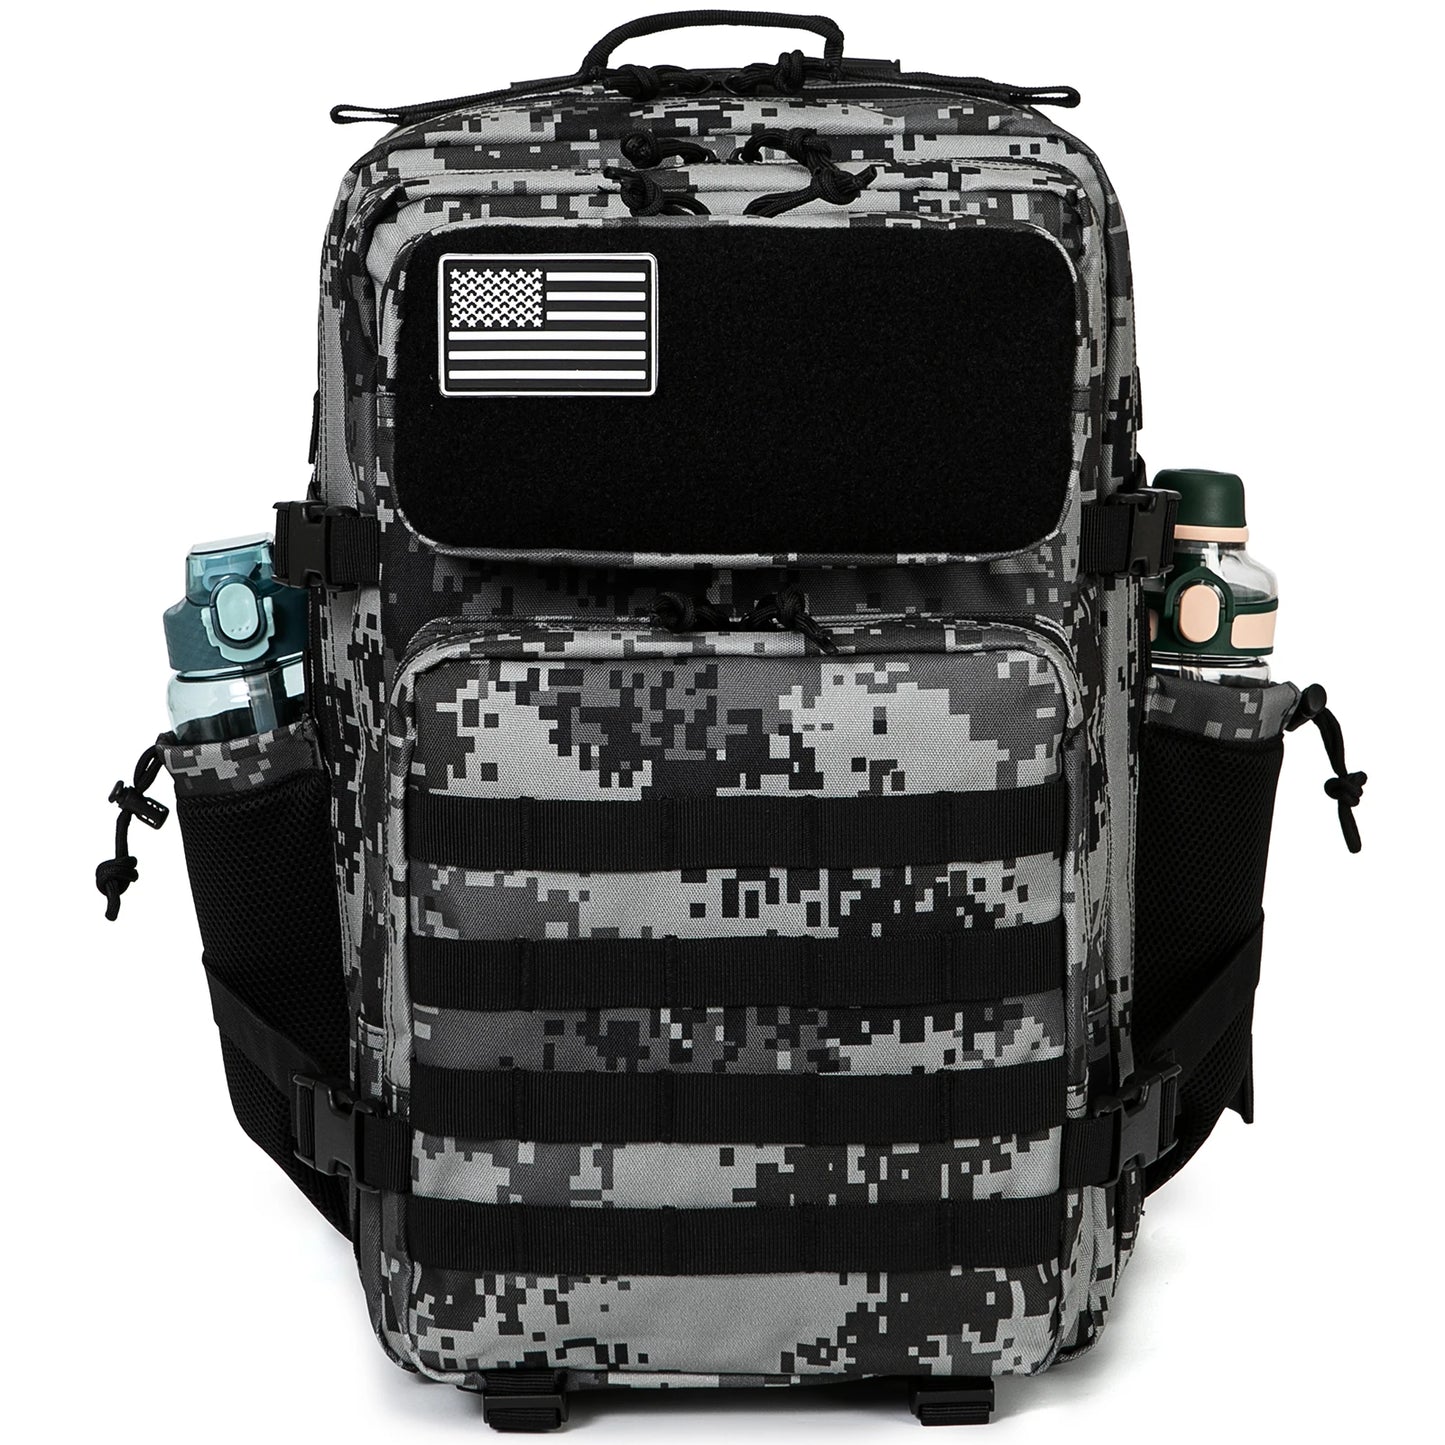 Wild West 45L Tactical Military-Style Backpack: Outdoor, Hiking, and Hunting Gear Bag with MOLLE System and Water Bottle Holder